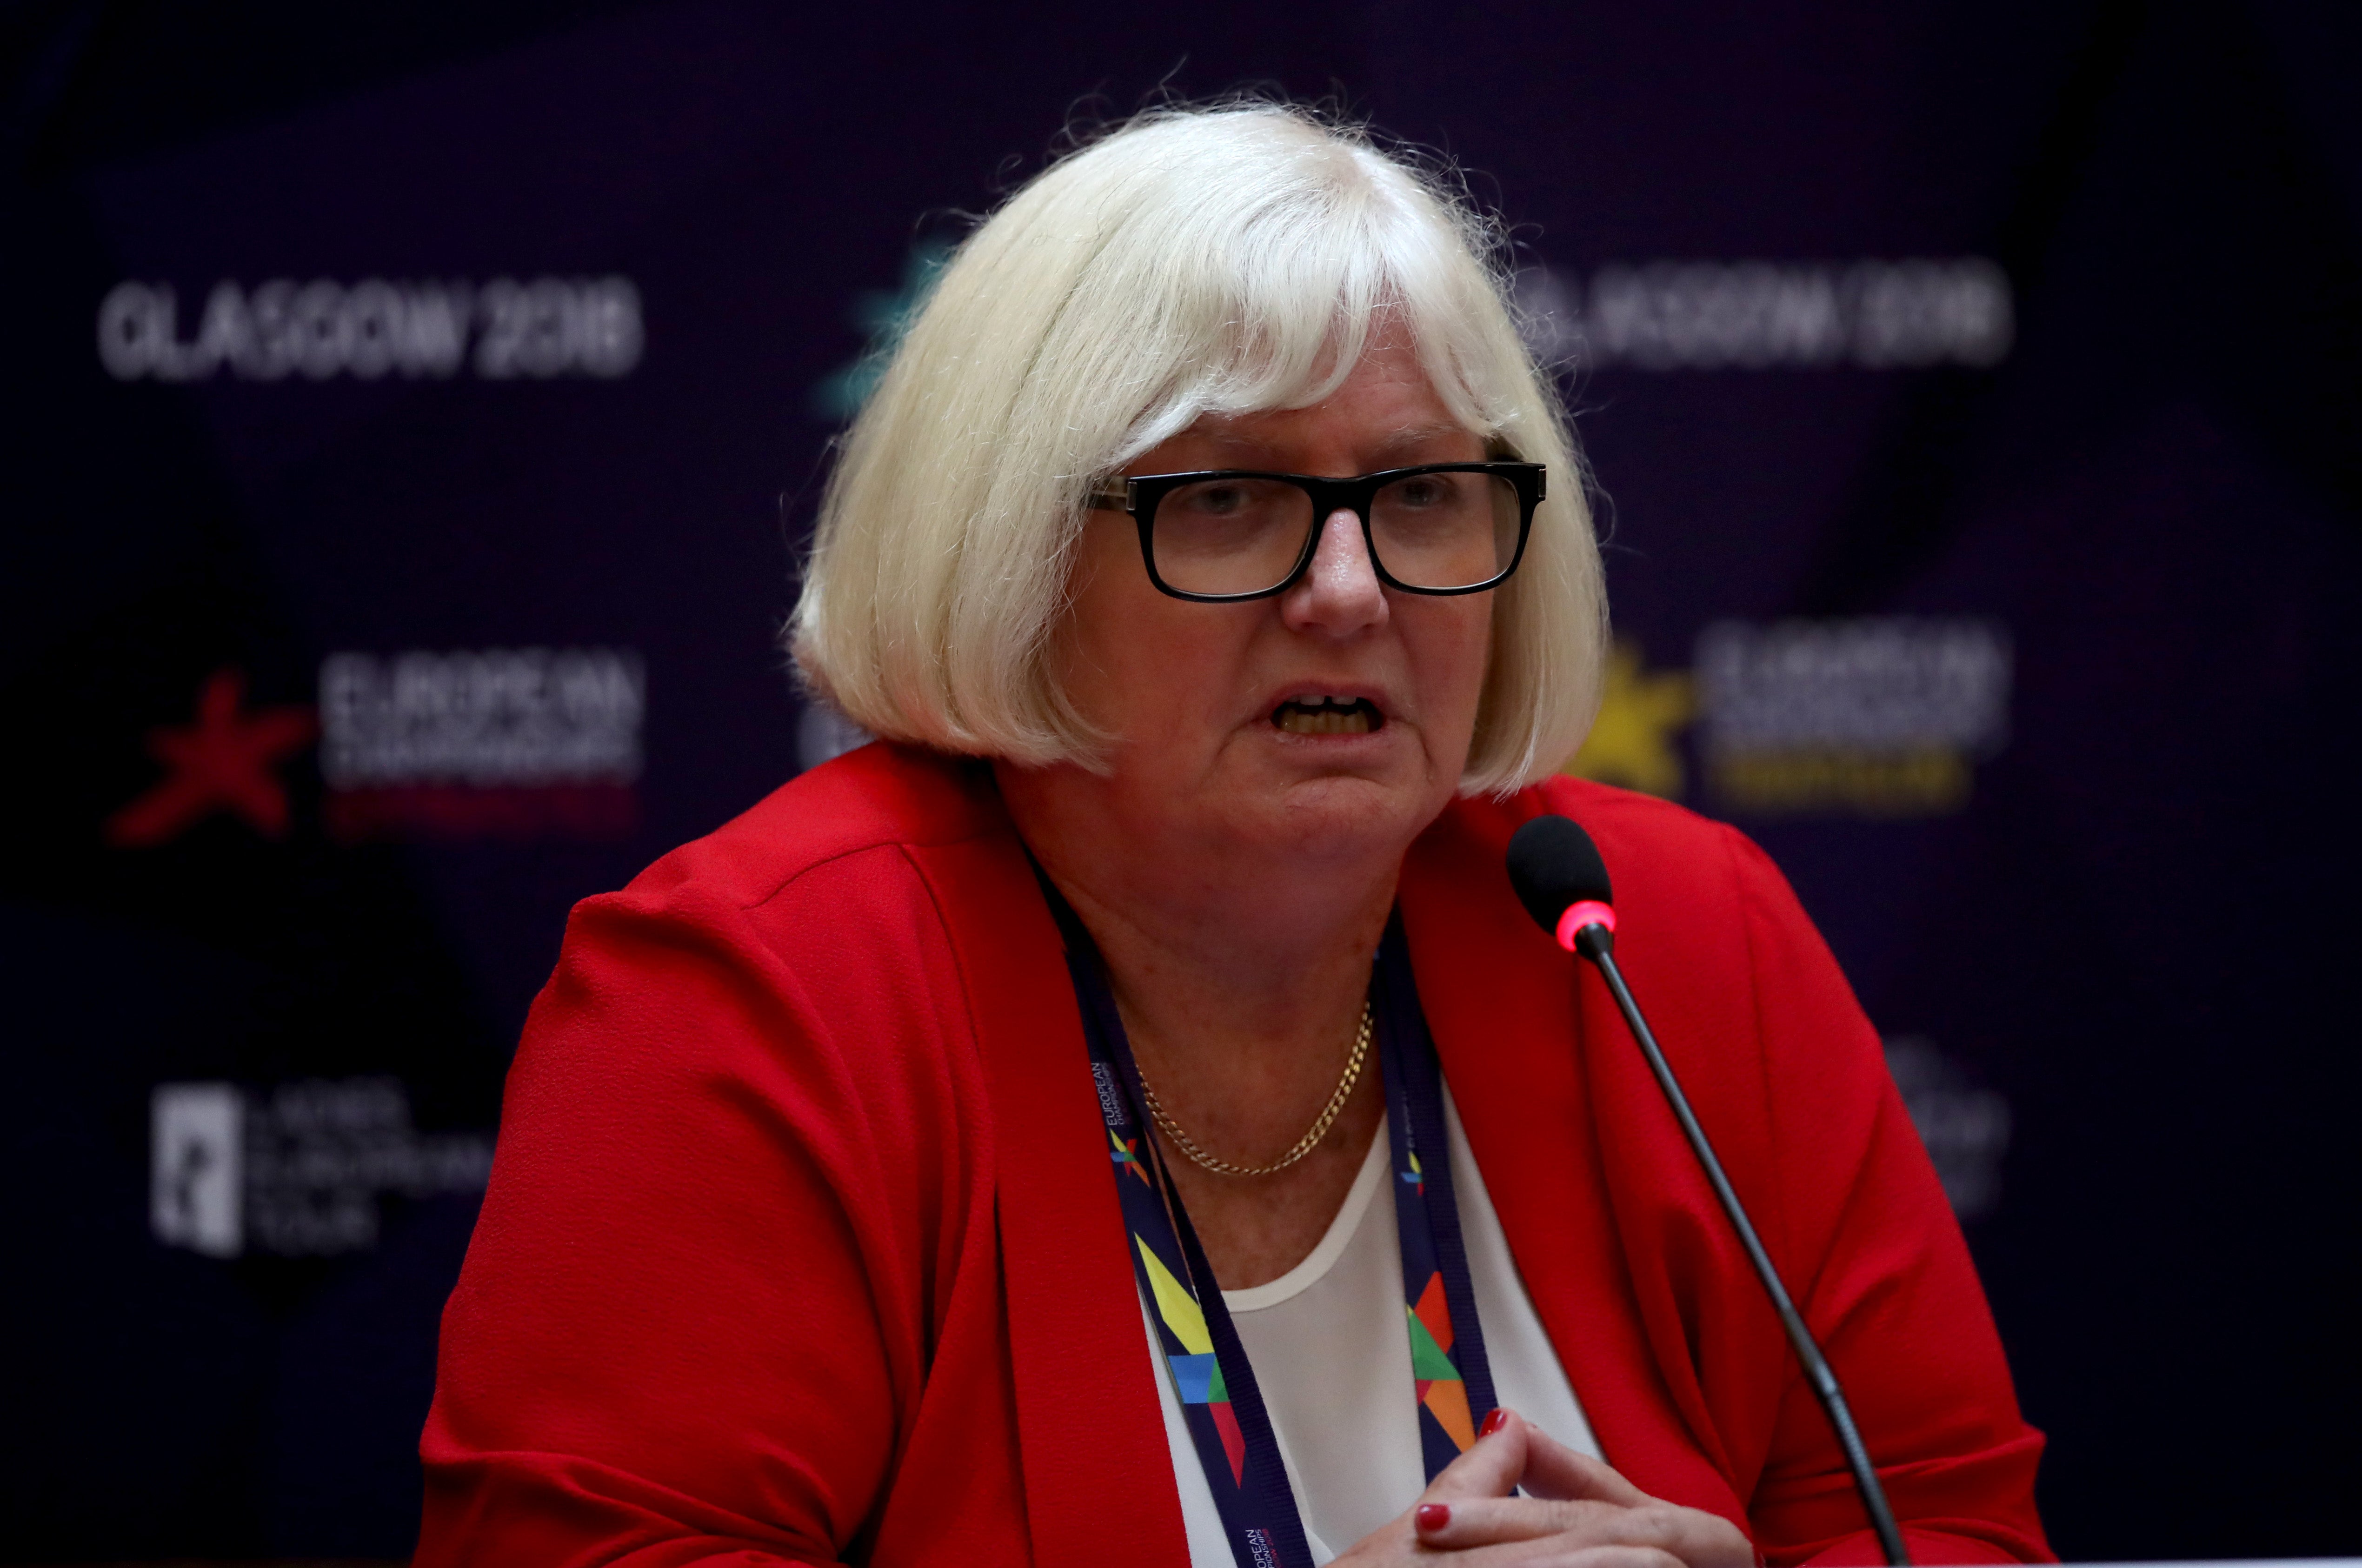 Jane Allen stepped down as British Gymnastics CEO amid an investigation into abuse allegations